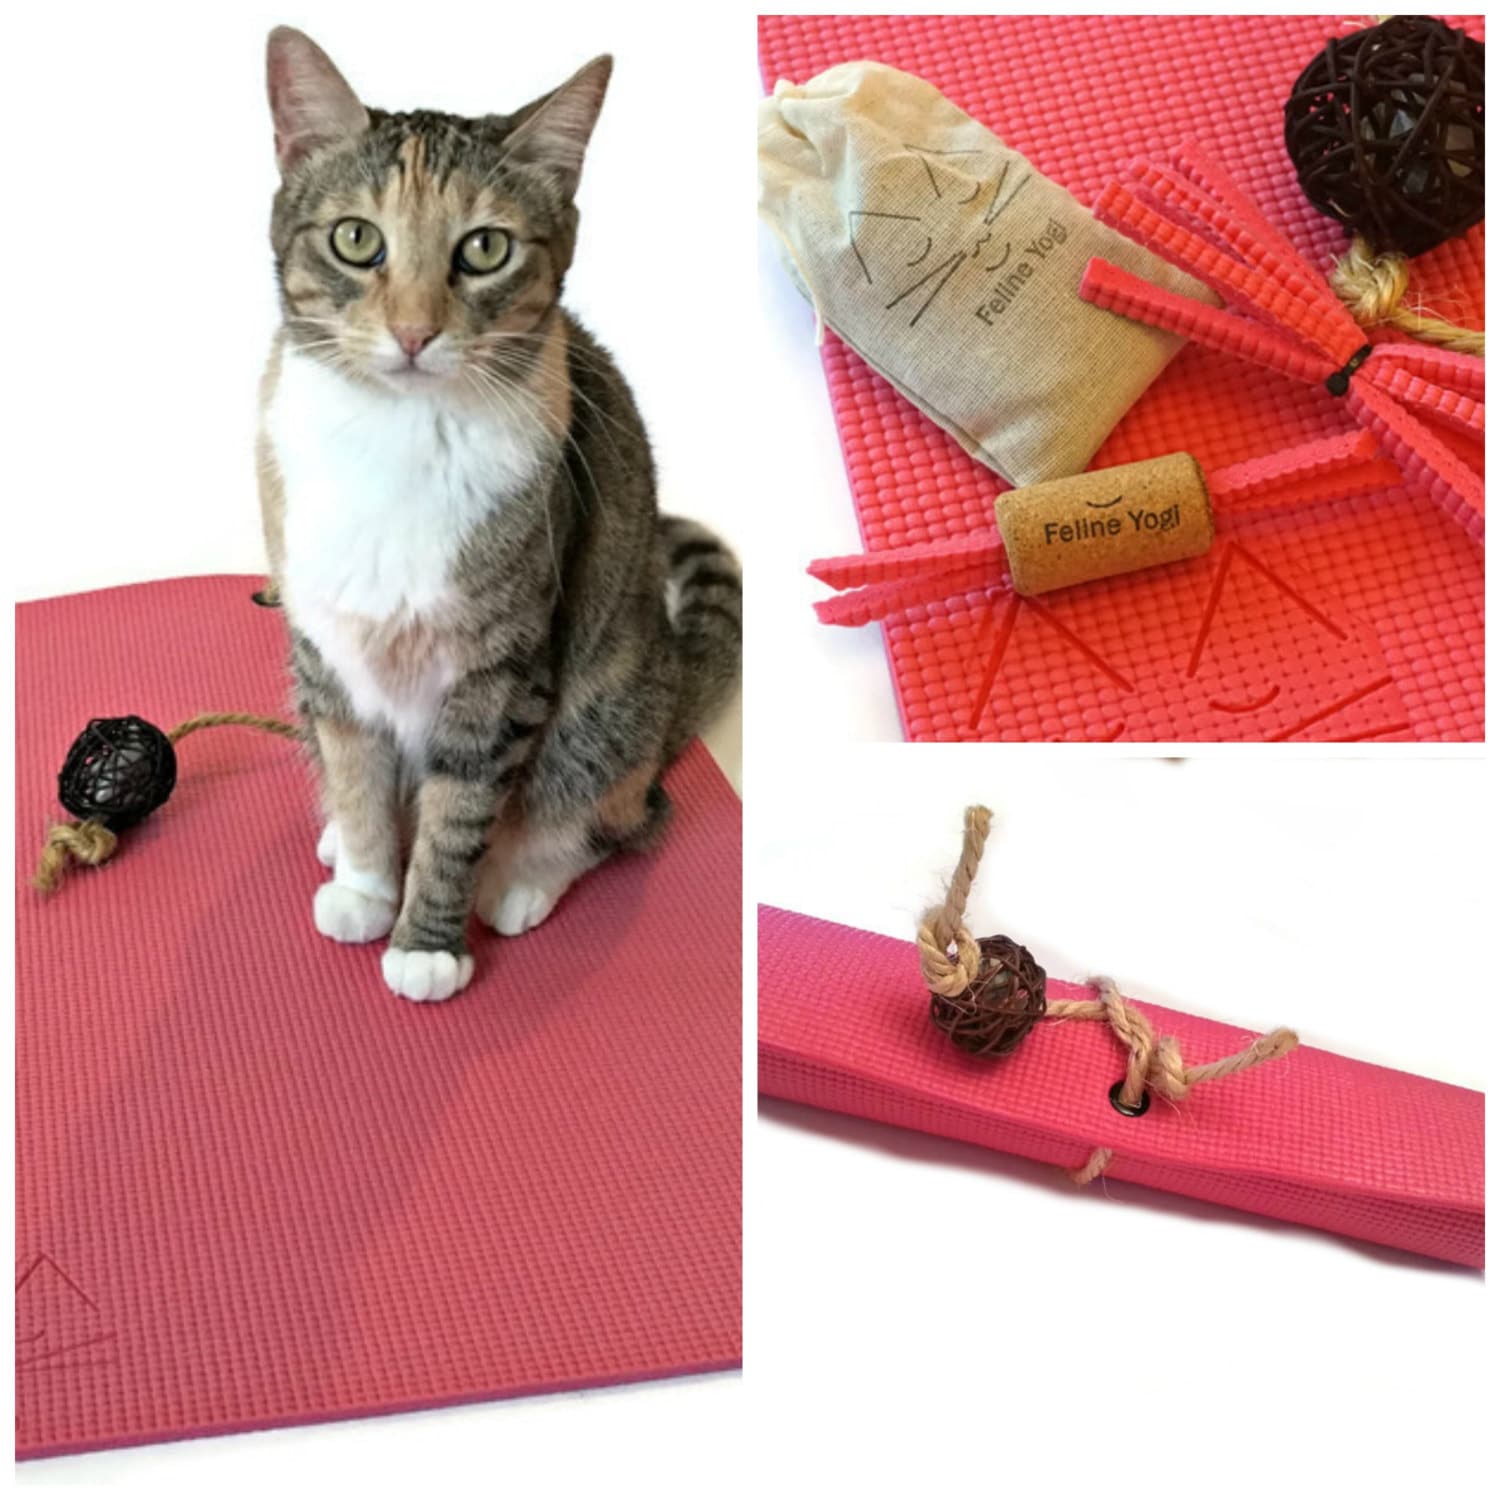 Cat Yoga, Cute Cat on Yoga Mat, Fun Cat in Yoga Position. Poster for Sale  by ziggistar